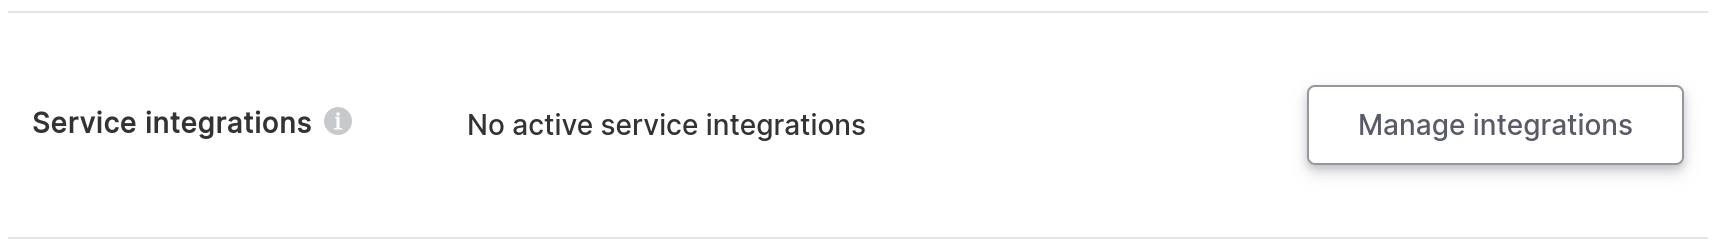 Manage Integrations item in database details page